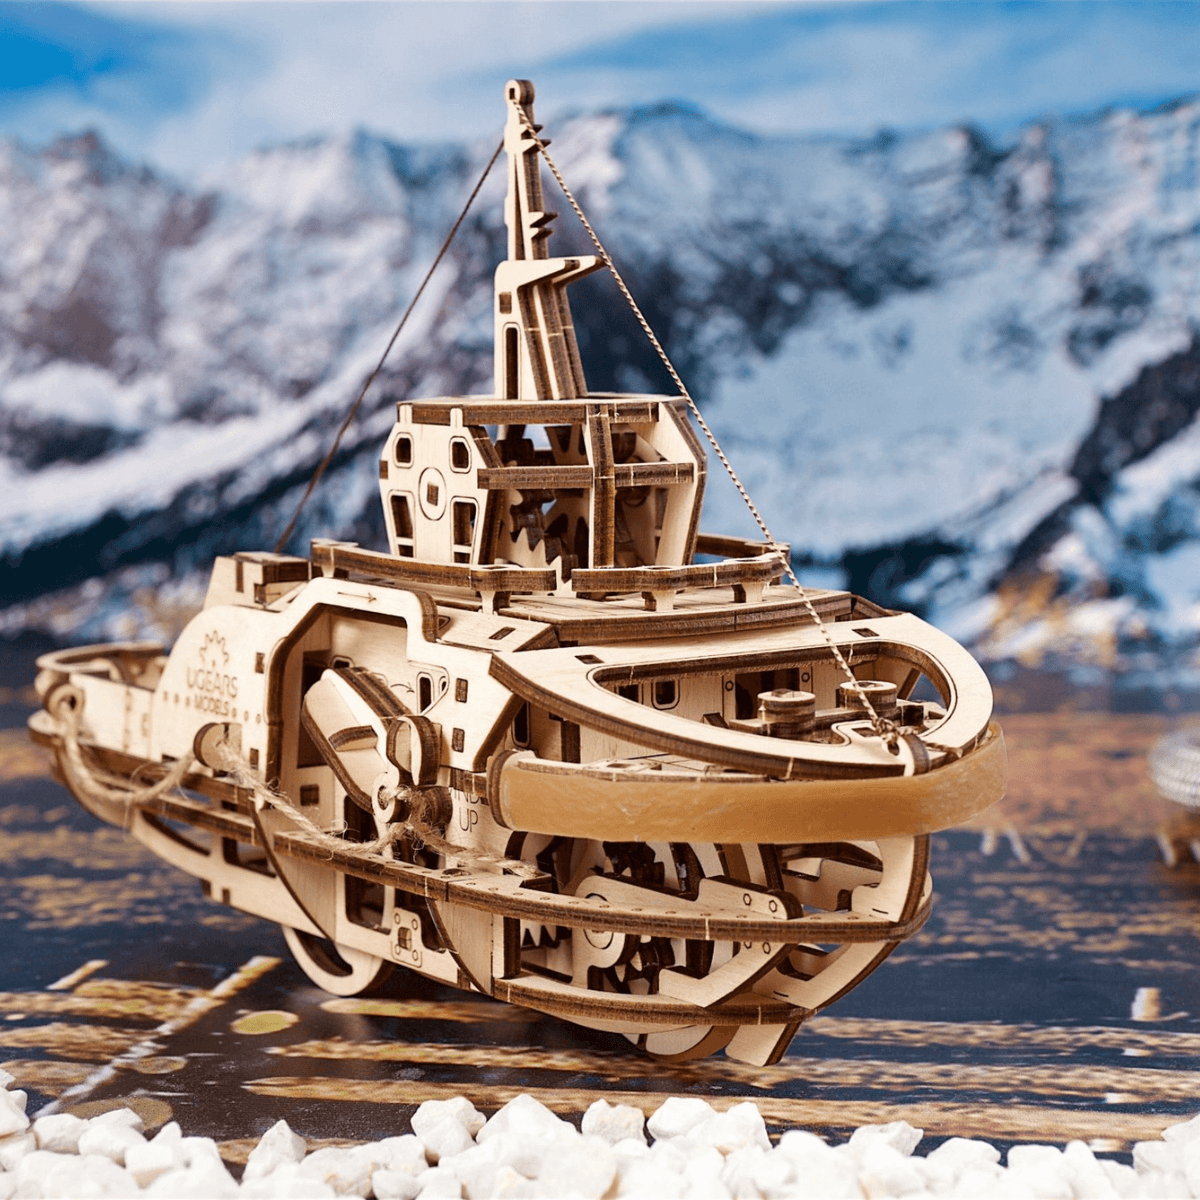 Tugboat Mechanical Wooden Puzzle Ugears--